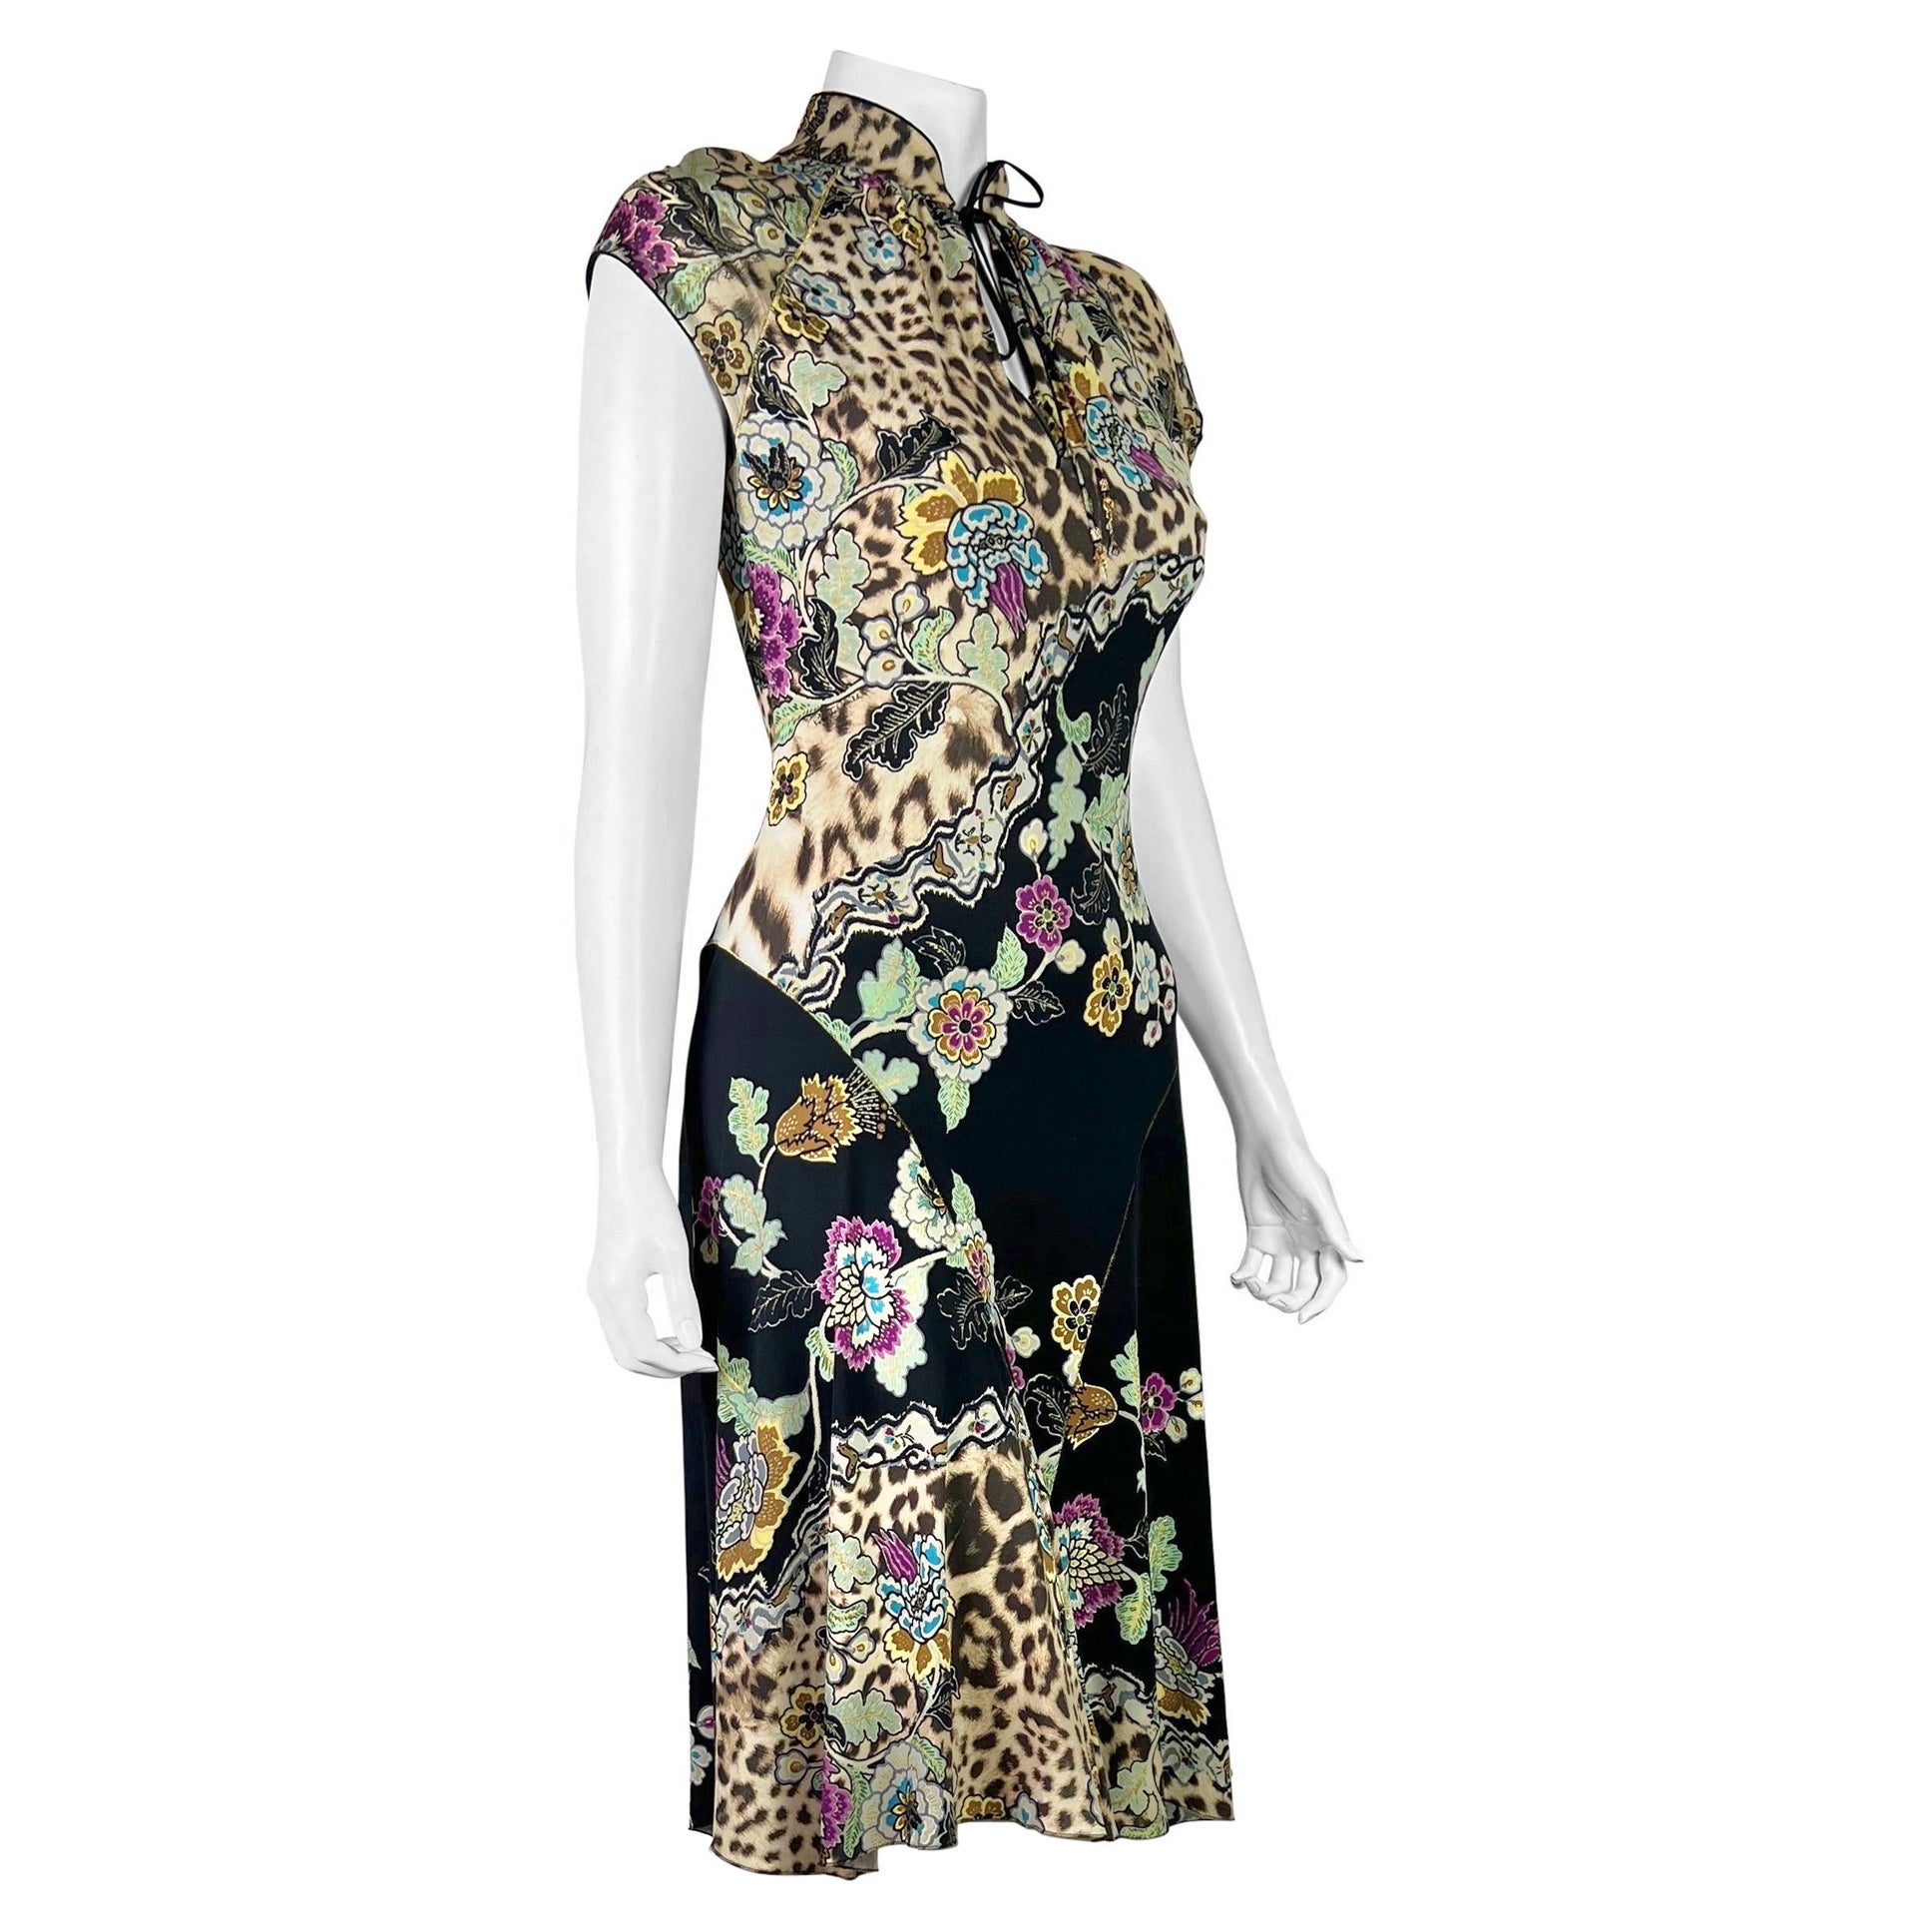 SS 2003 Roberto Cavalli Chinoiserie Dress For Sale